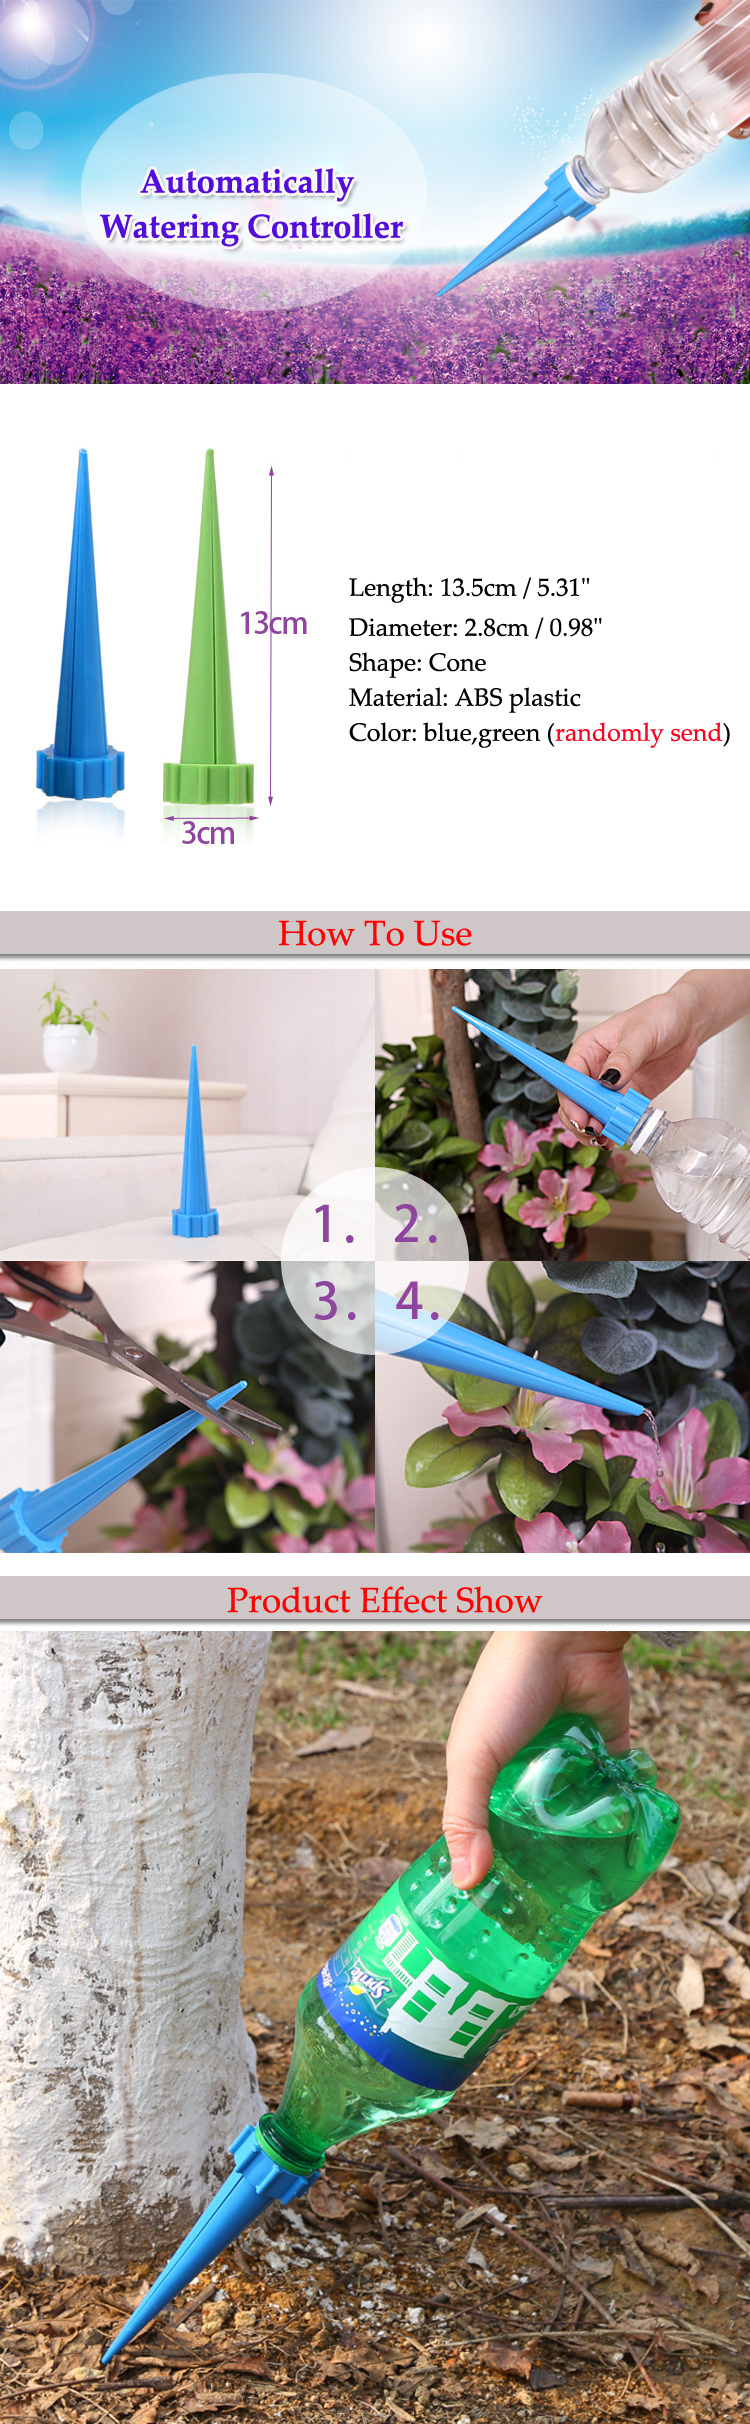 garden automatically watering kits